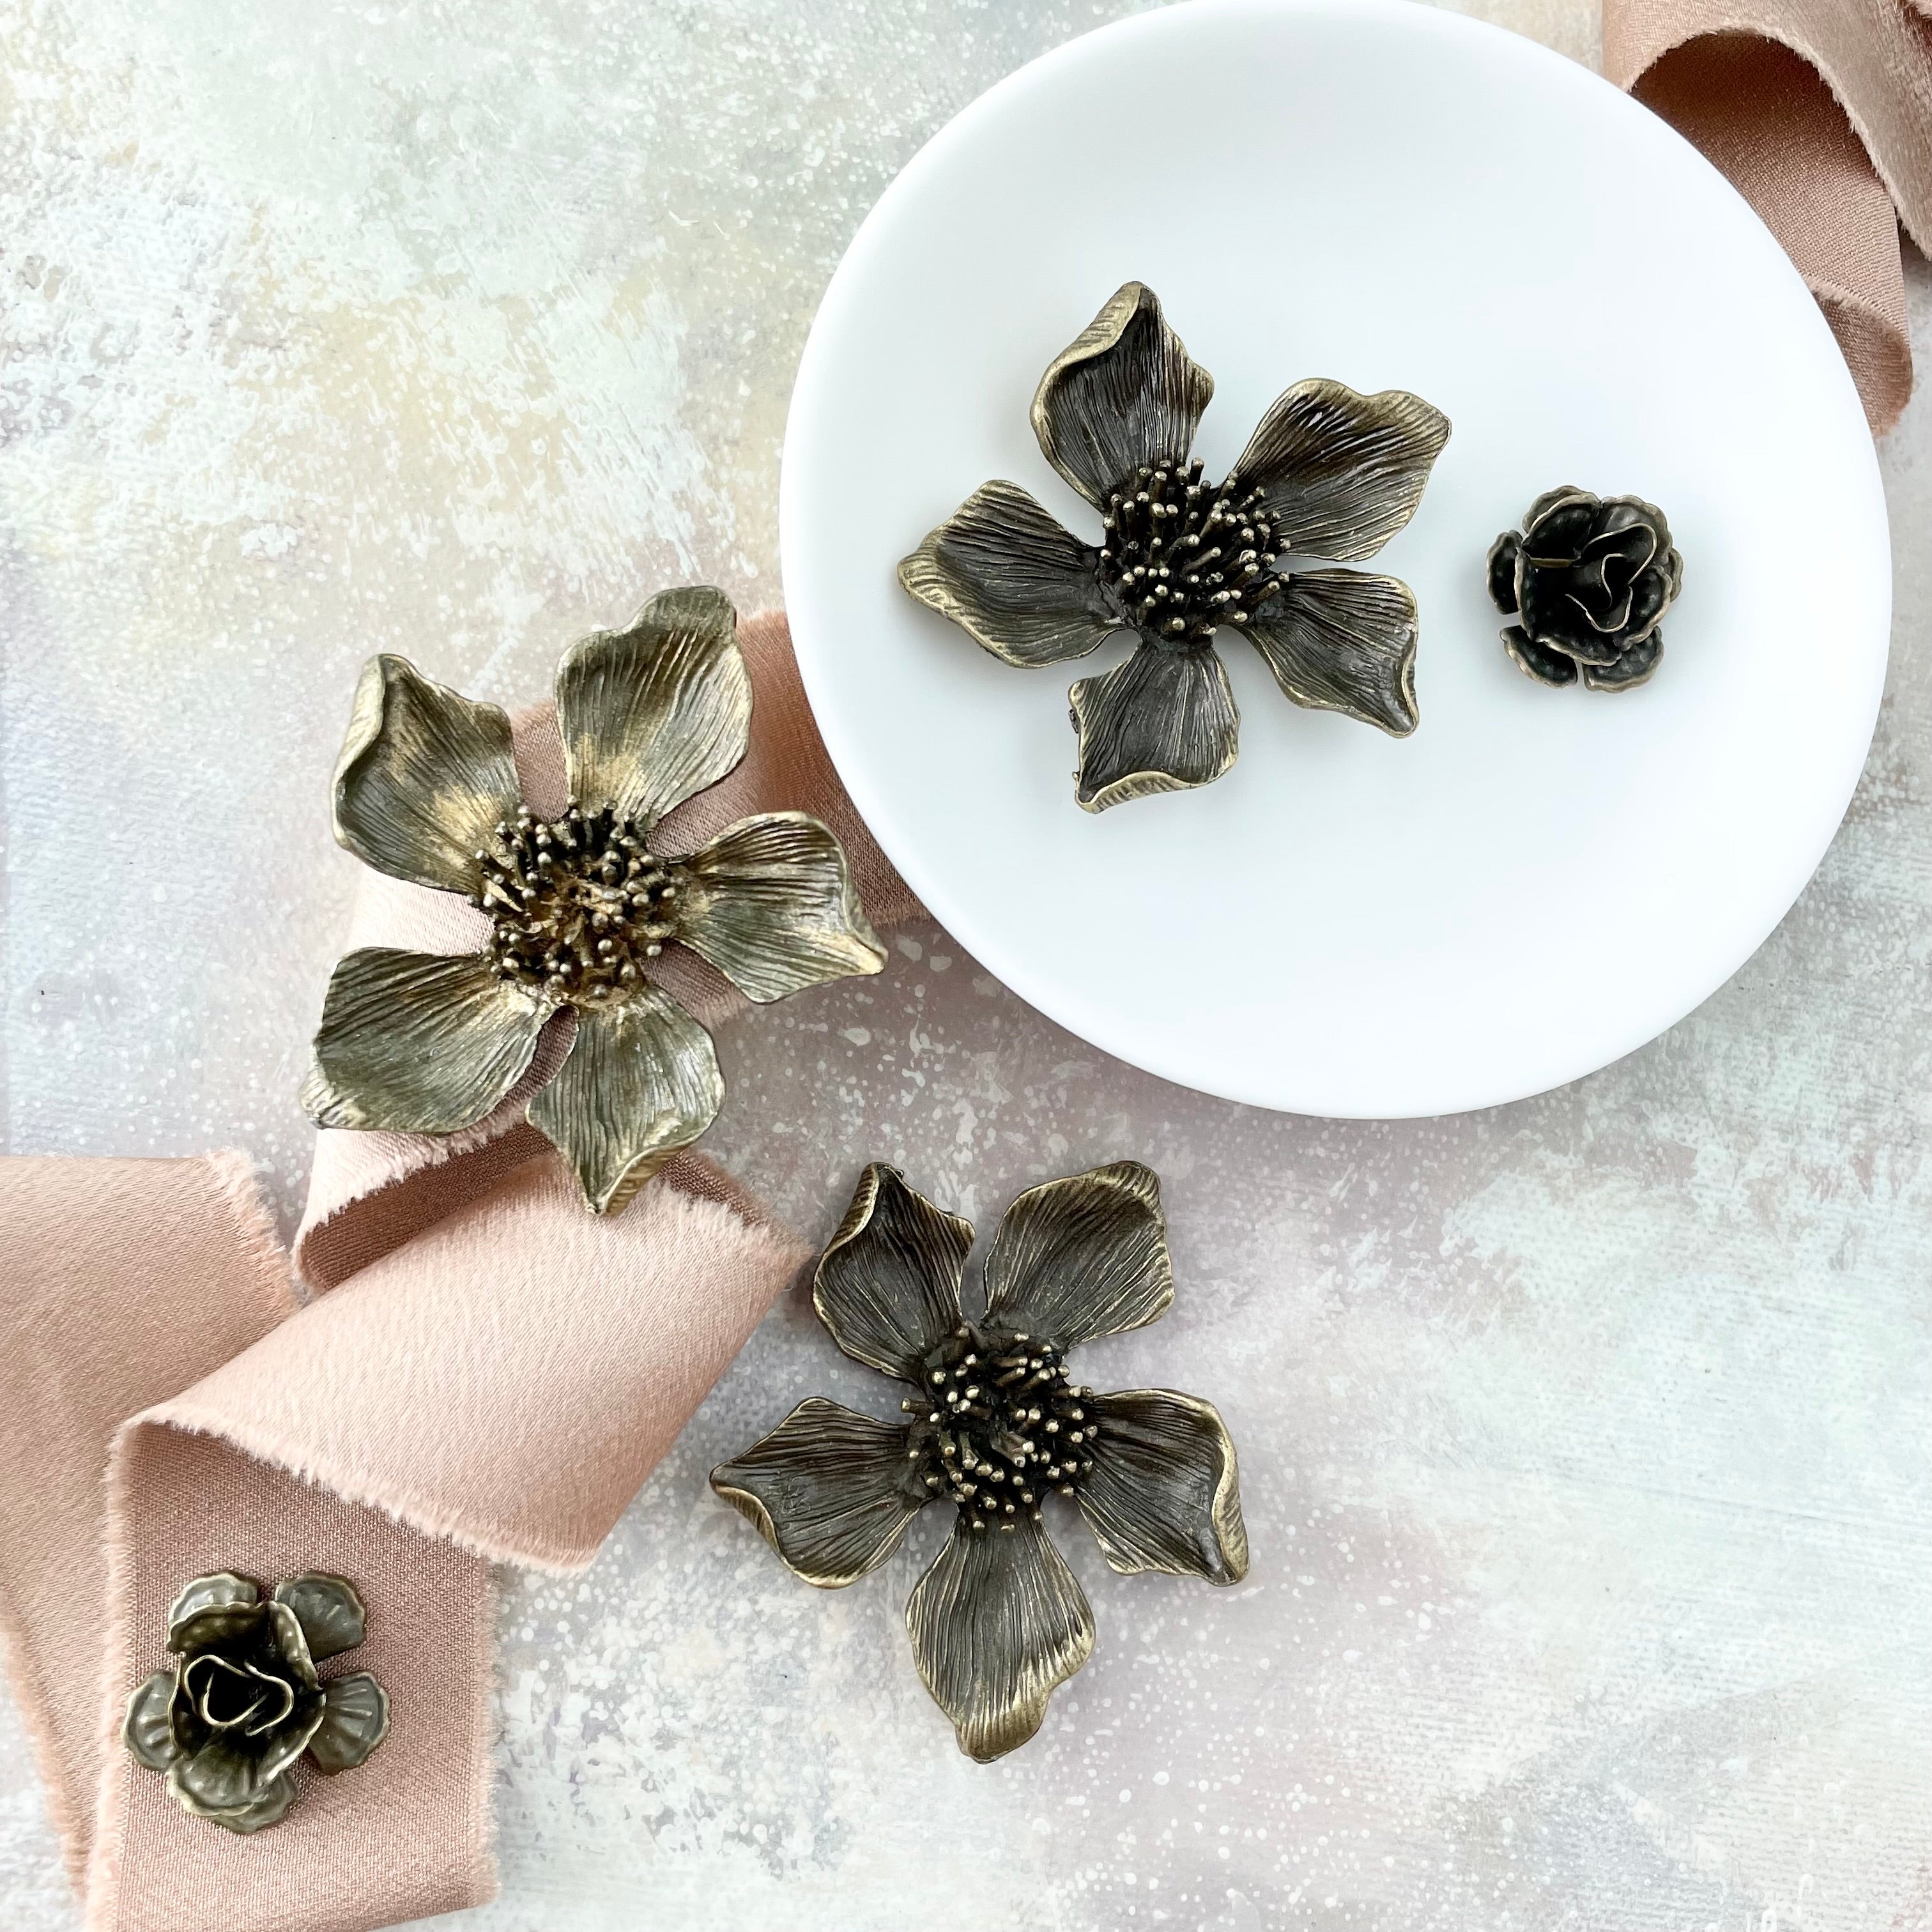 3 large metal styling flowers, two mini bronze styling flowers with a white dish and tan ribbon -  Flat lay props from Champagne & GRIT 